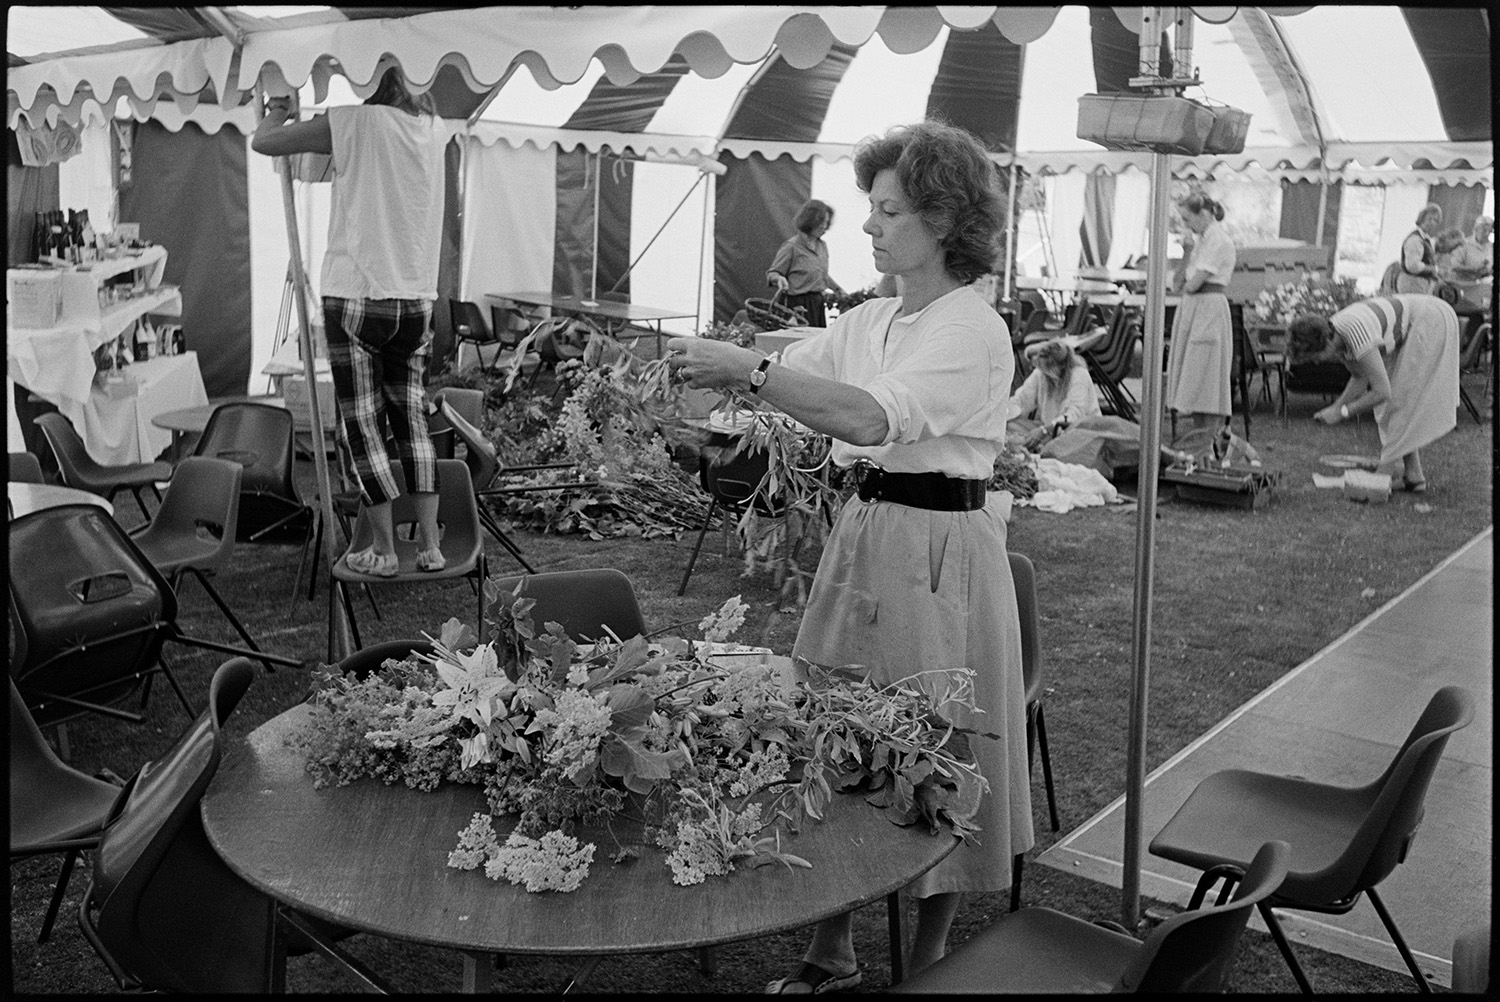 Women decorating marquee tent for hunt ball with flowers.
[Women decorating the inside of a marquee with flowers for the Eggesford Hunt Ball at Colleton Manor, Chulmleigh. A woman is making a flower arrangement at a table in the foreground.]